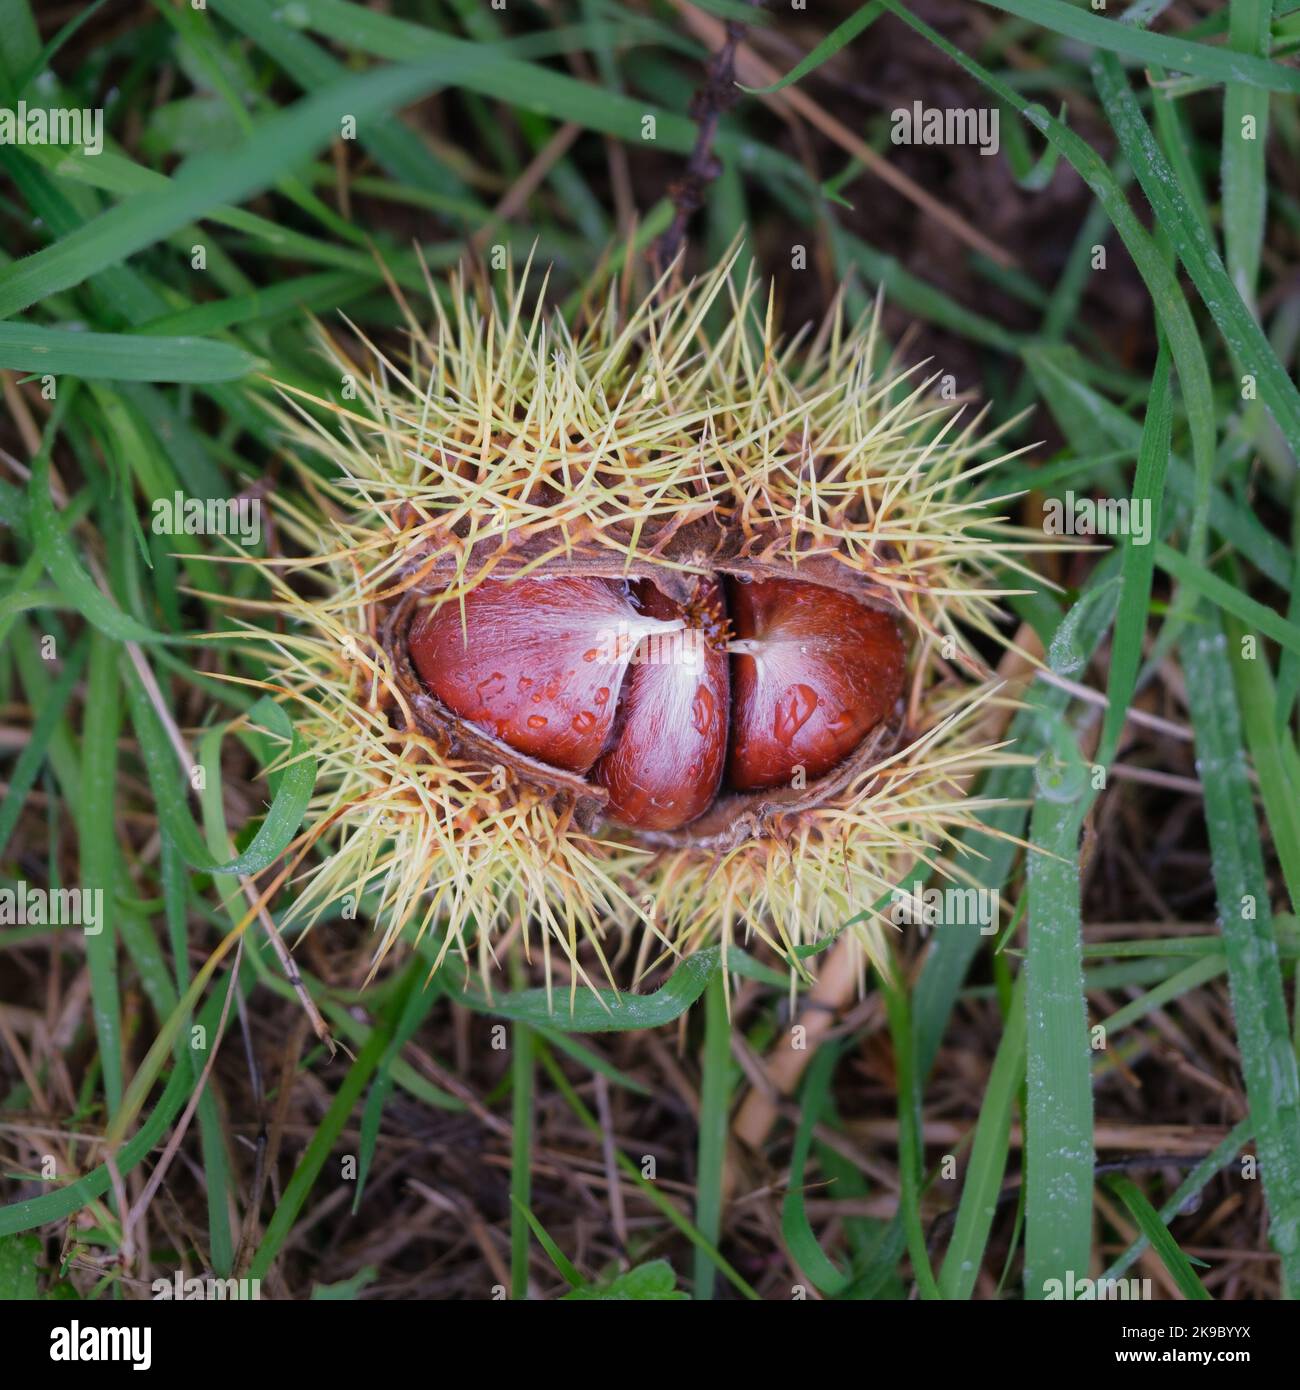 Top Down View of Horse Chestnuts, Just Opening on the Ground. Stock Photo